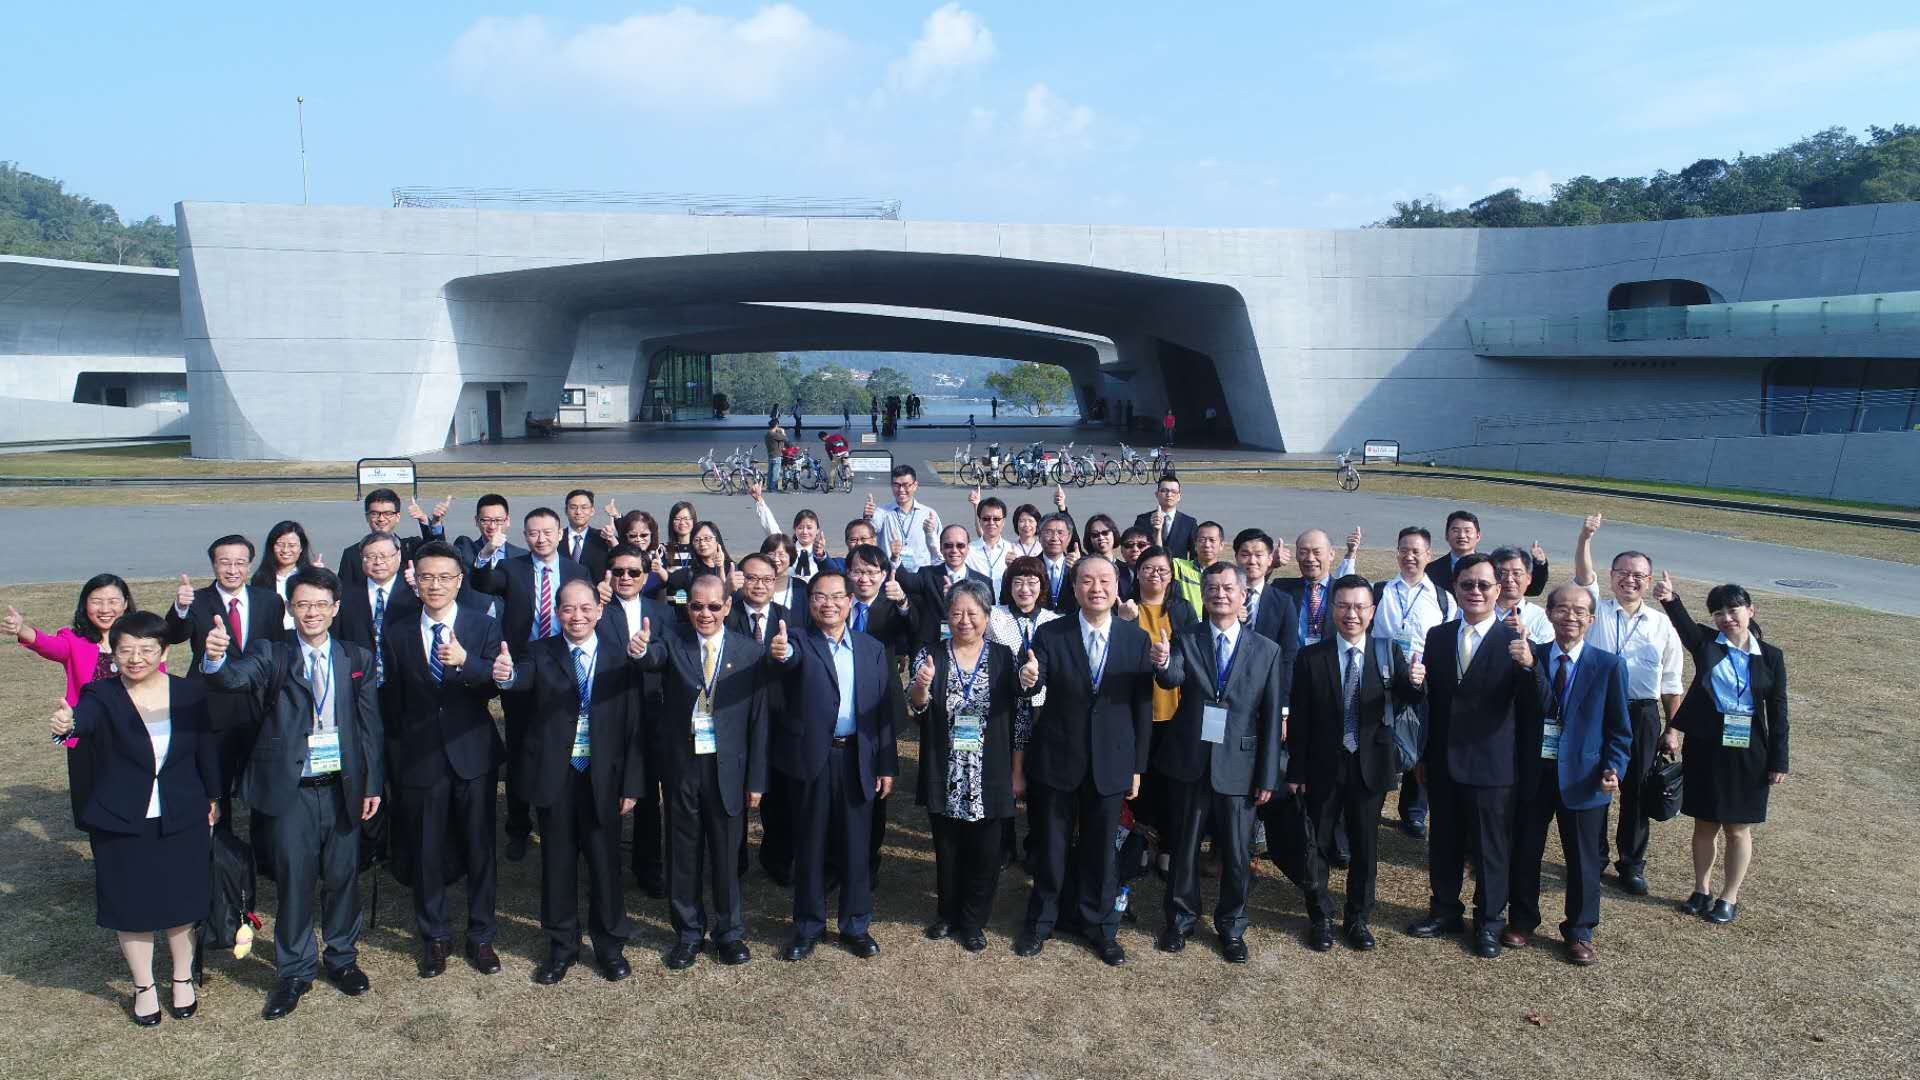 Group photograph taken at conference venue in Sun Moon Lake, Taiwan